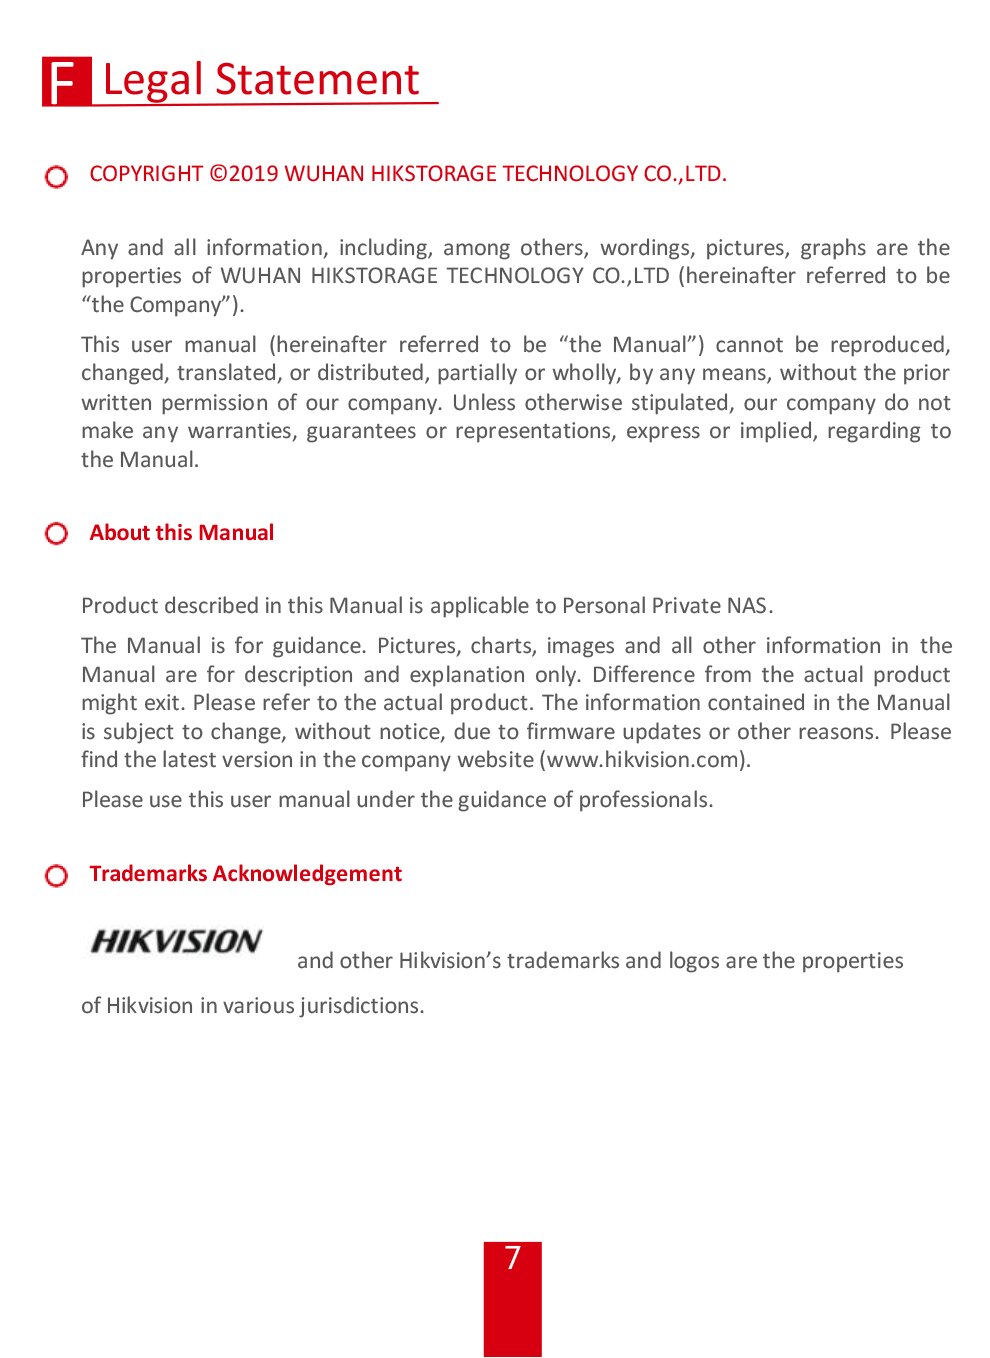 User-Manual-of-Hikvision-Personal-Private-NAS-H90-20190717-8